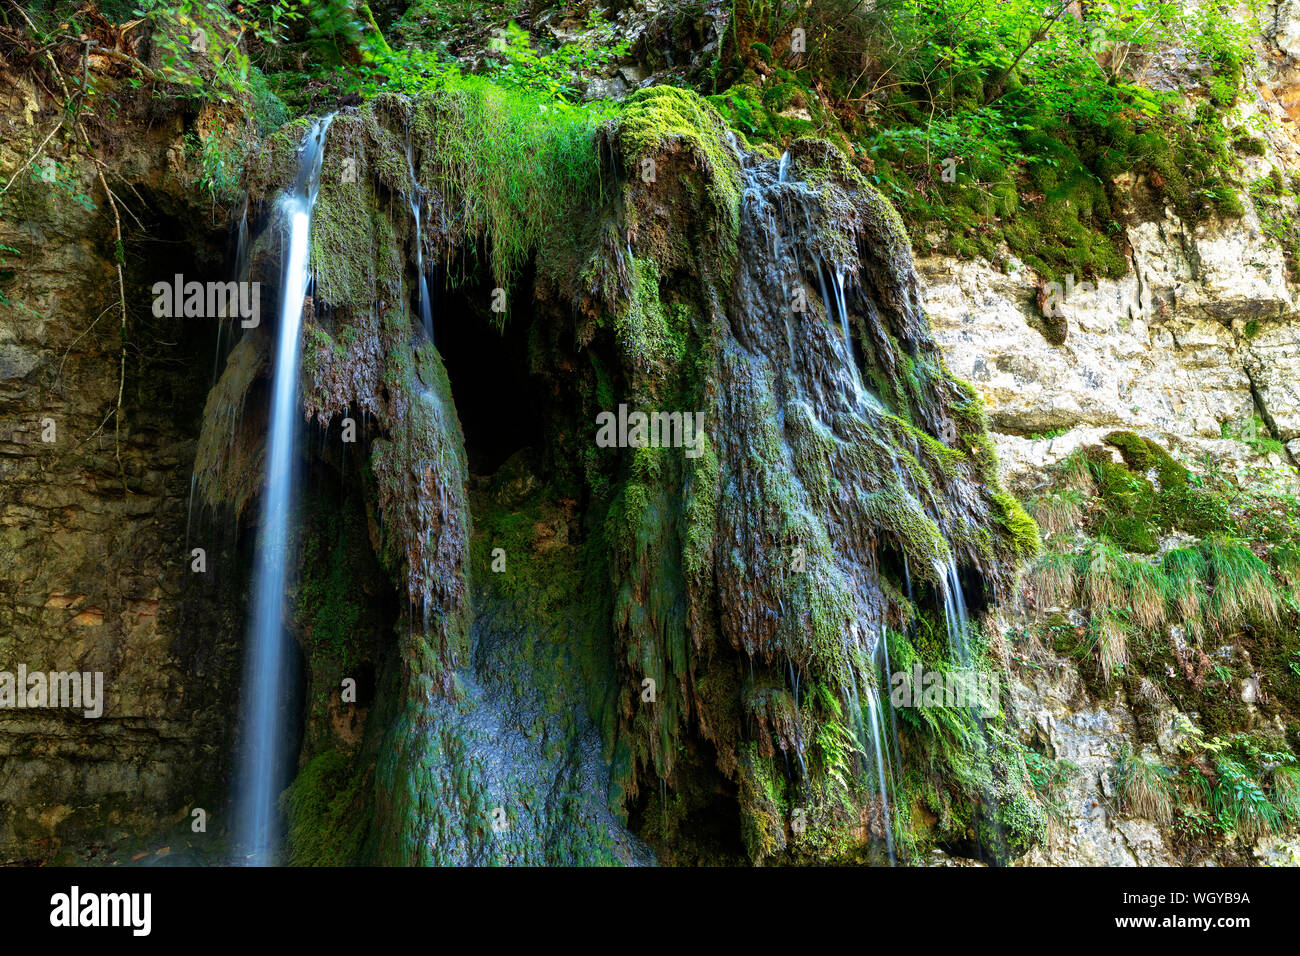 Tannegger Waterfall with its bizarre tufa formation in the Wutach Gorge Nature Reserve, Black Forest, Baden-Württemberg, Germany Stock Photo